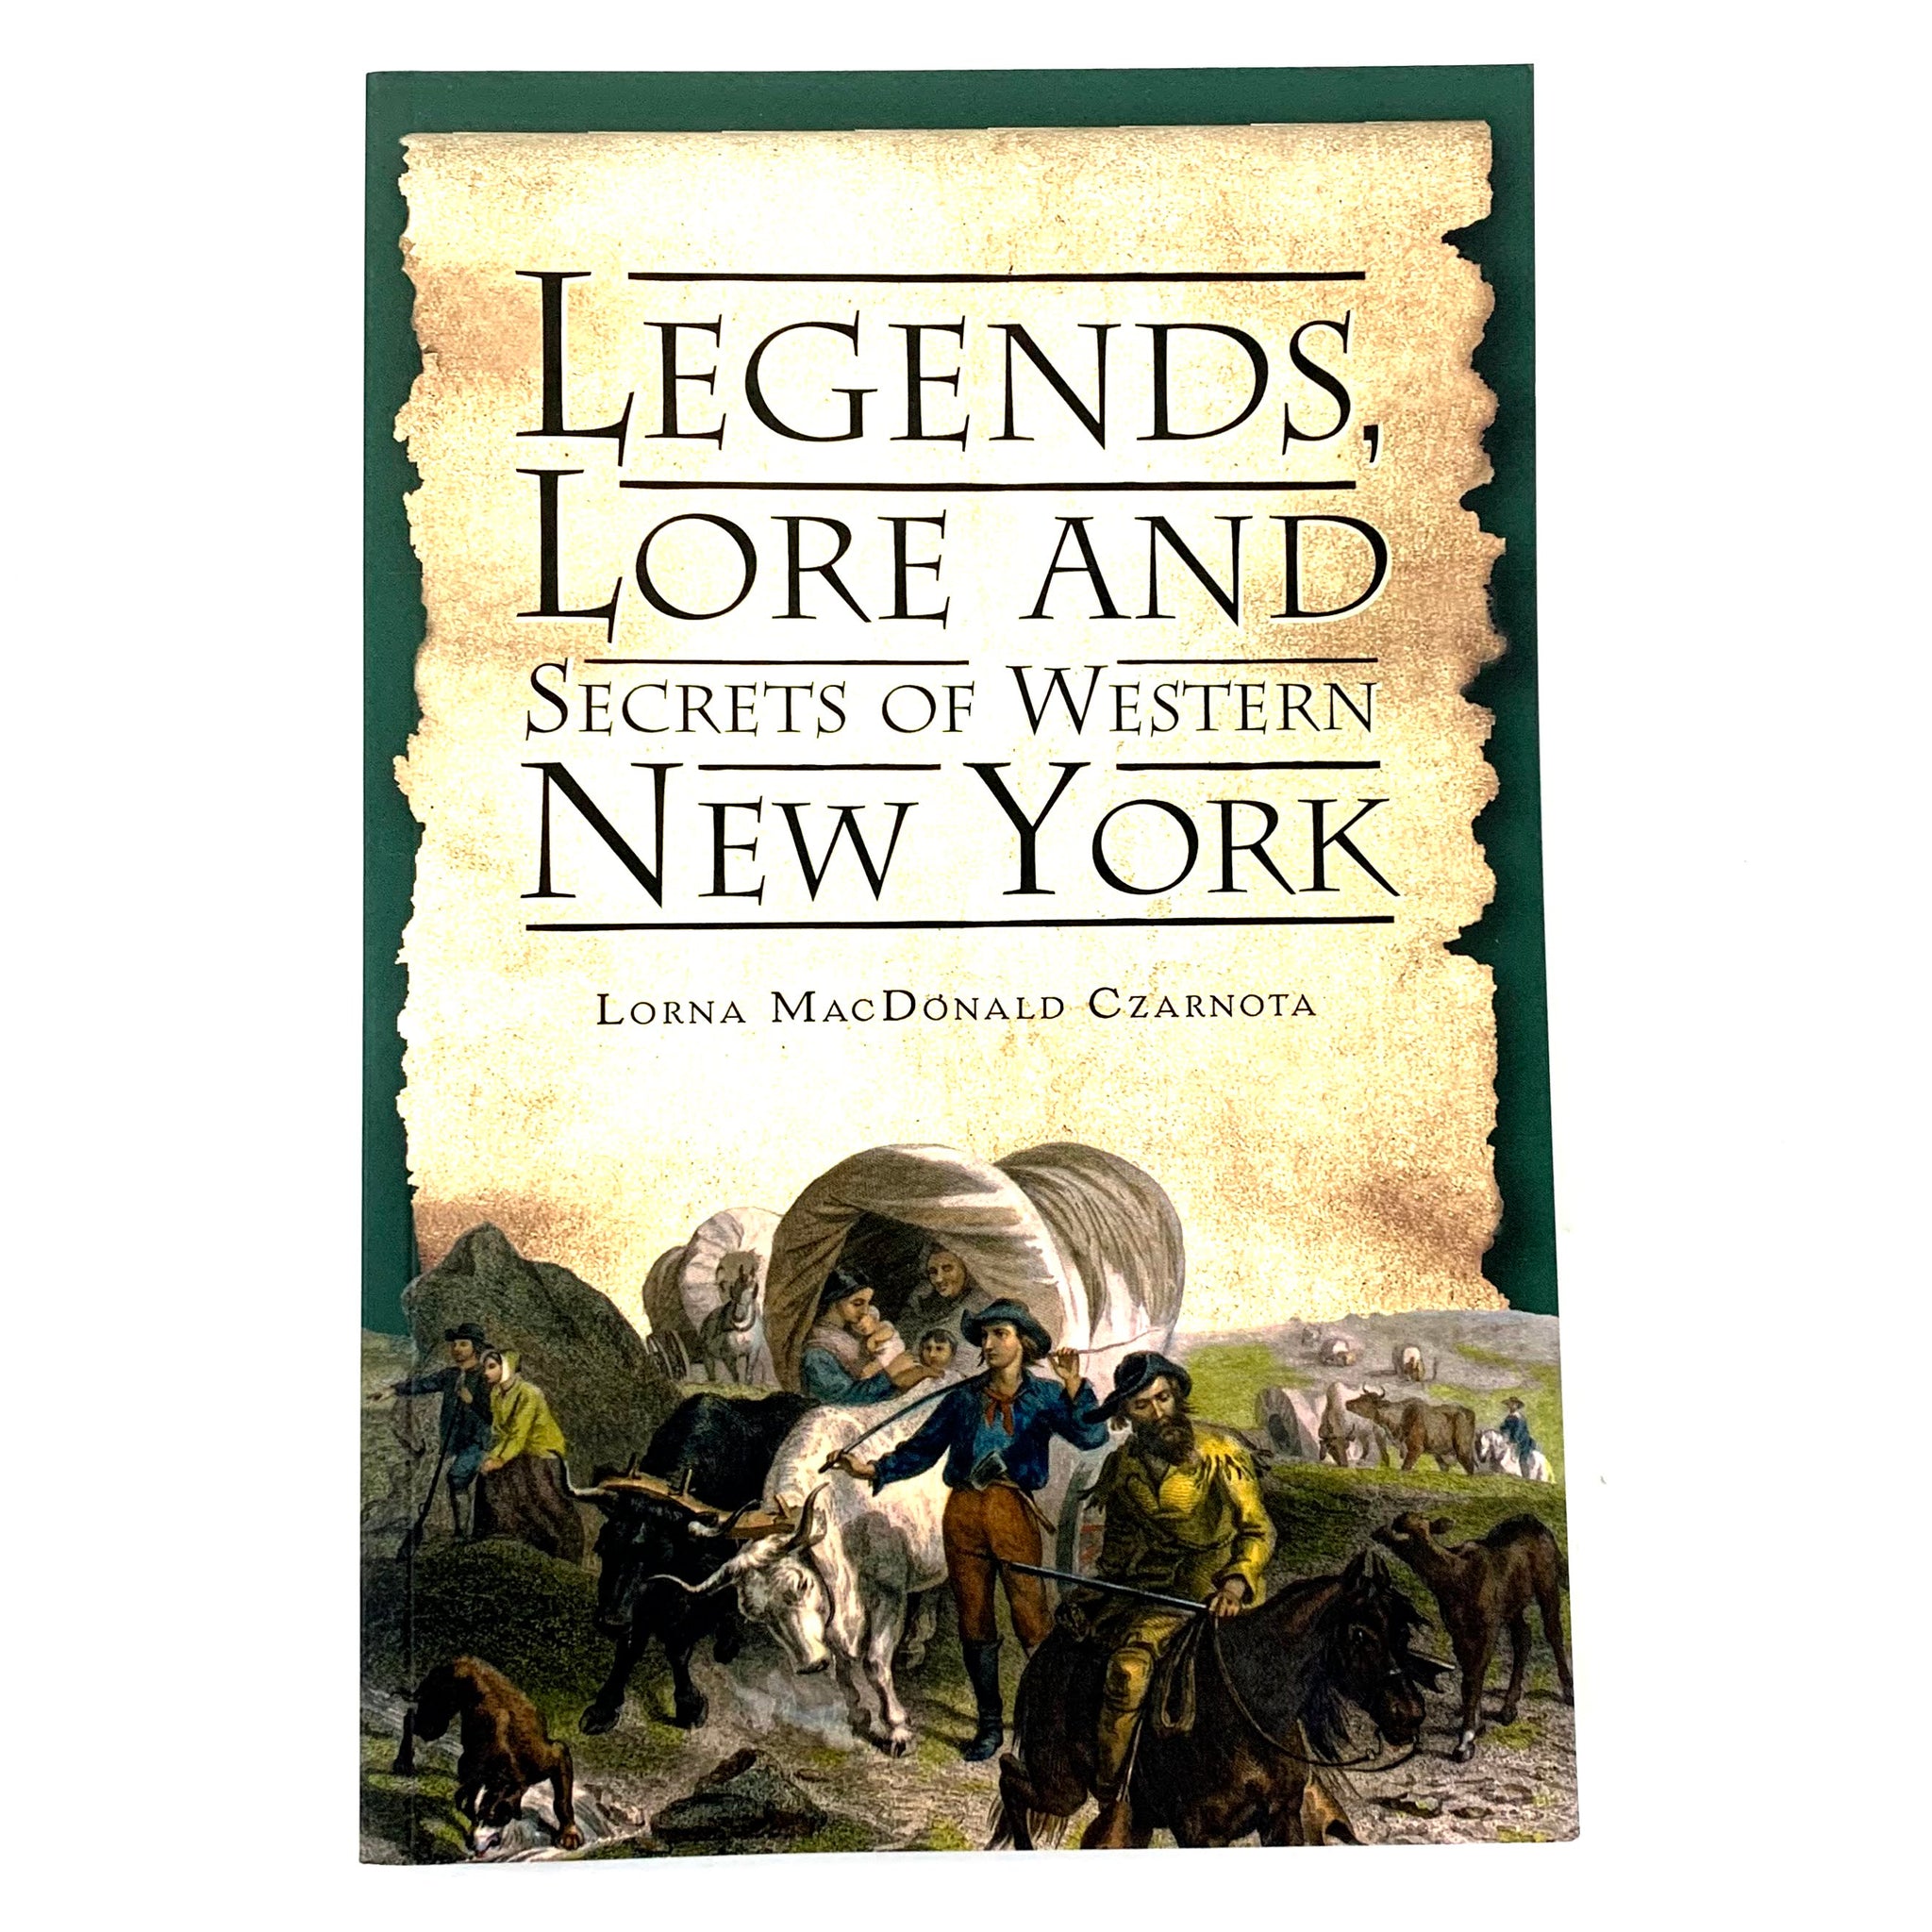 "Legends, Lore and Secrets of Western New York" Book